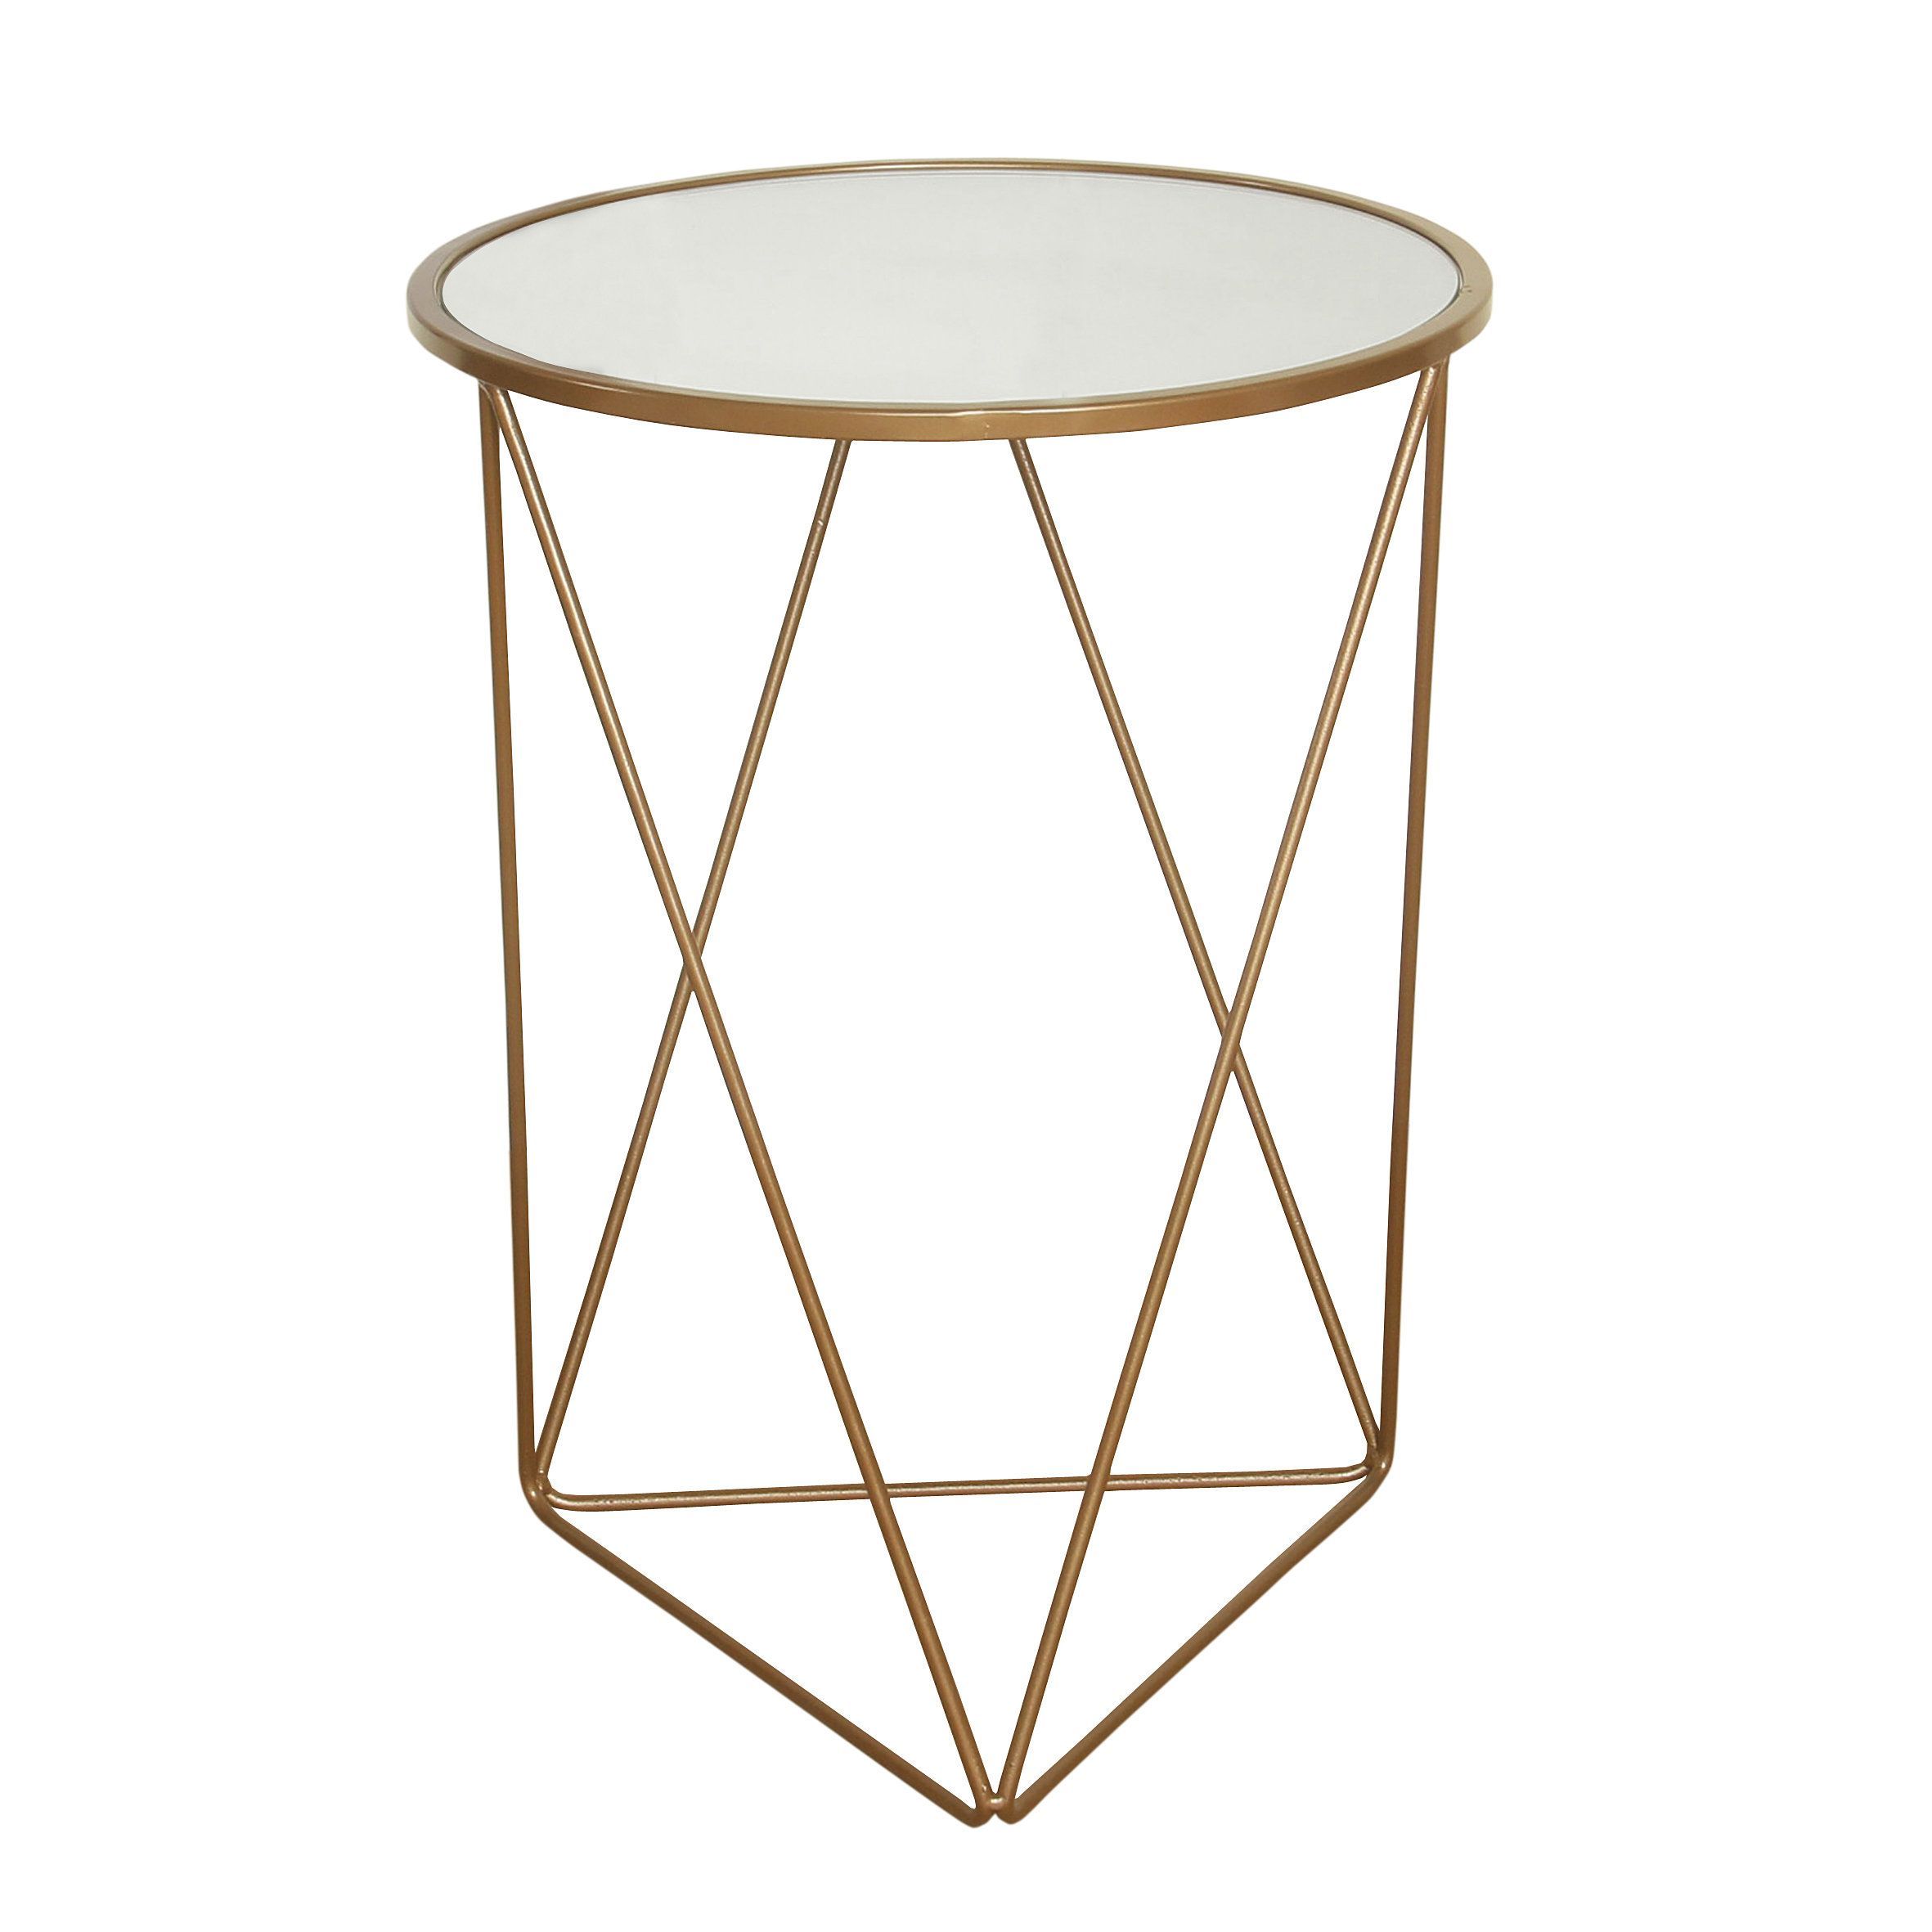 homepop metal accent table triangle gold base round glass top clarissa ashley furniture chairside end tall dining set vintage marble tables modern lamp designs with shelves drum